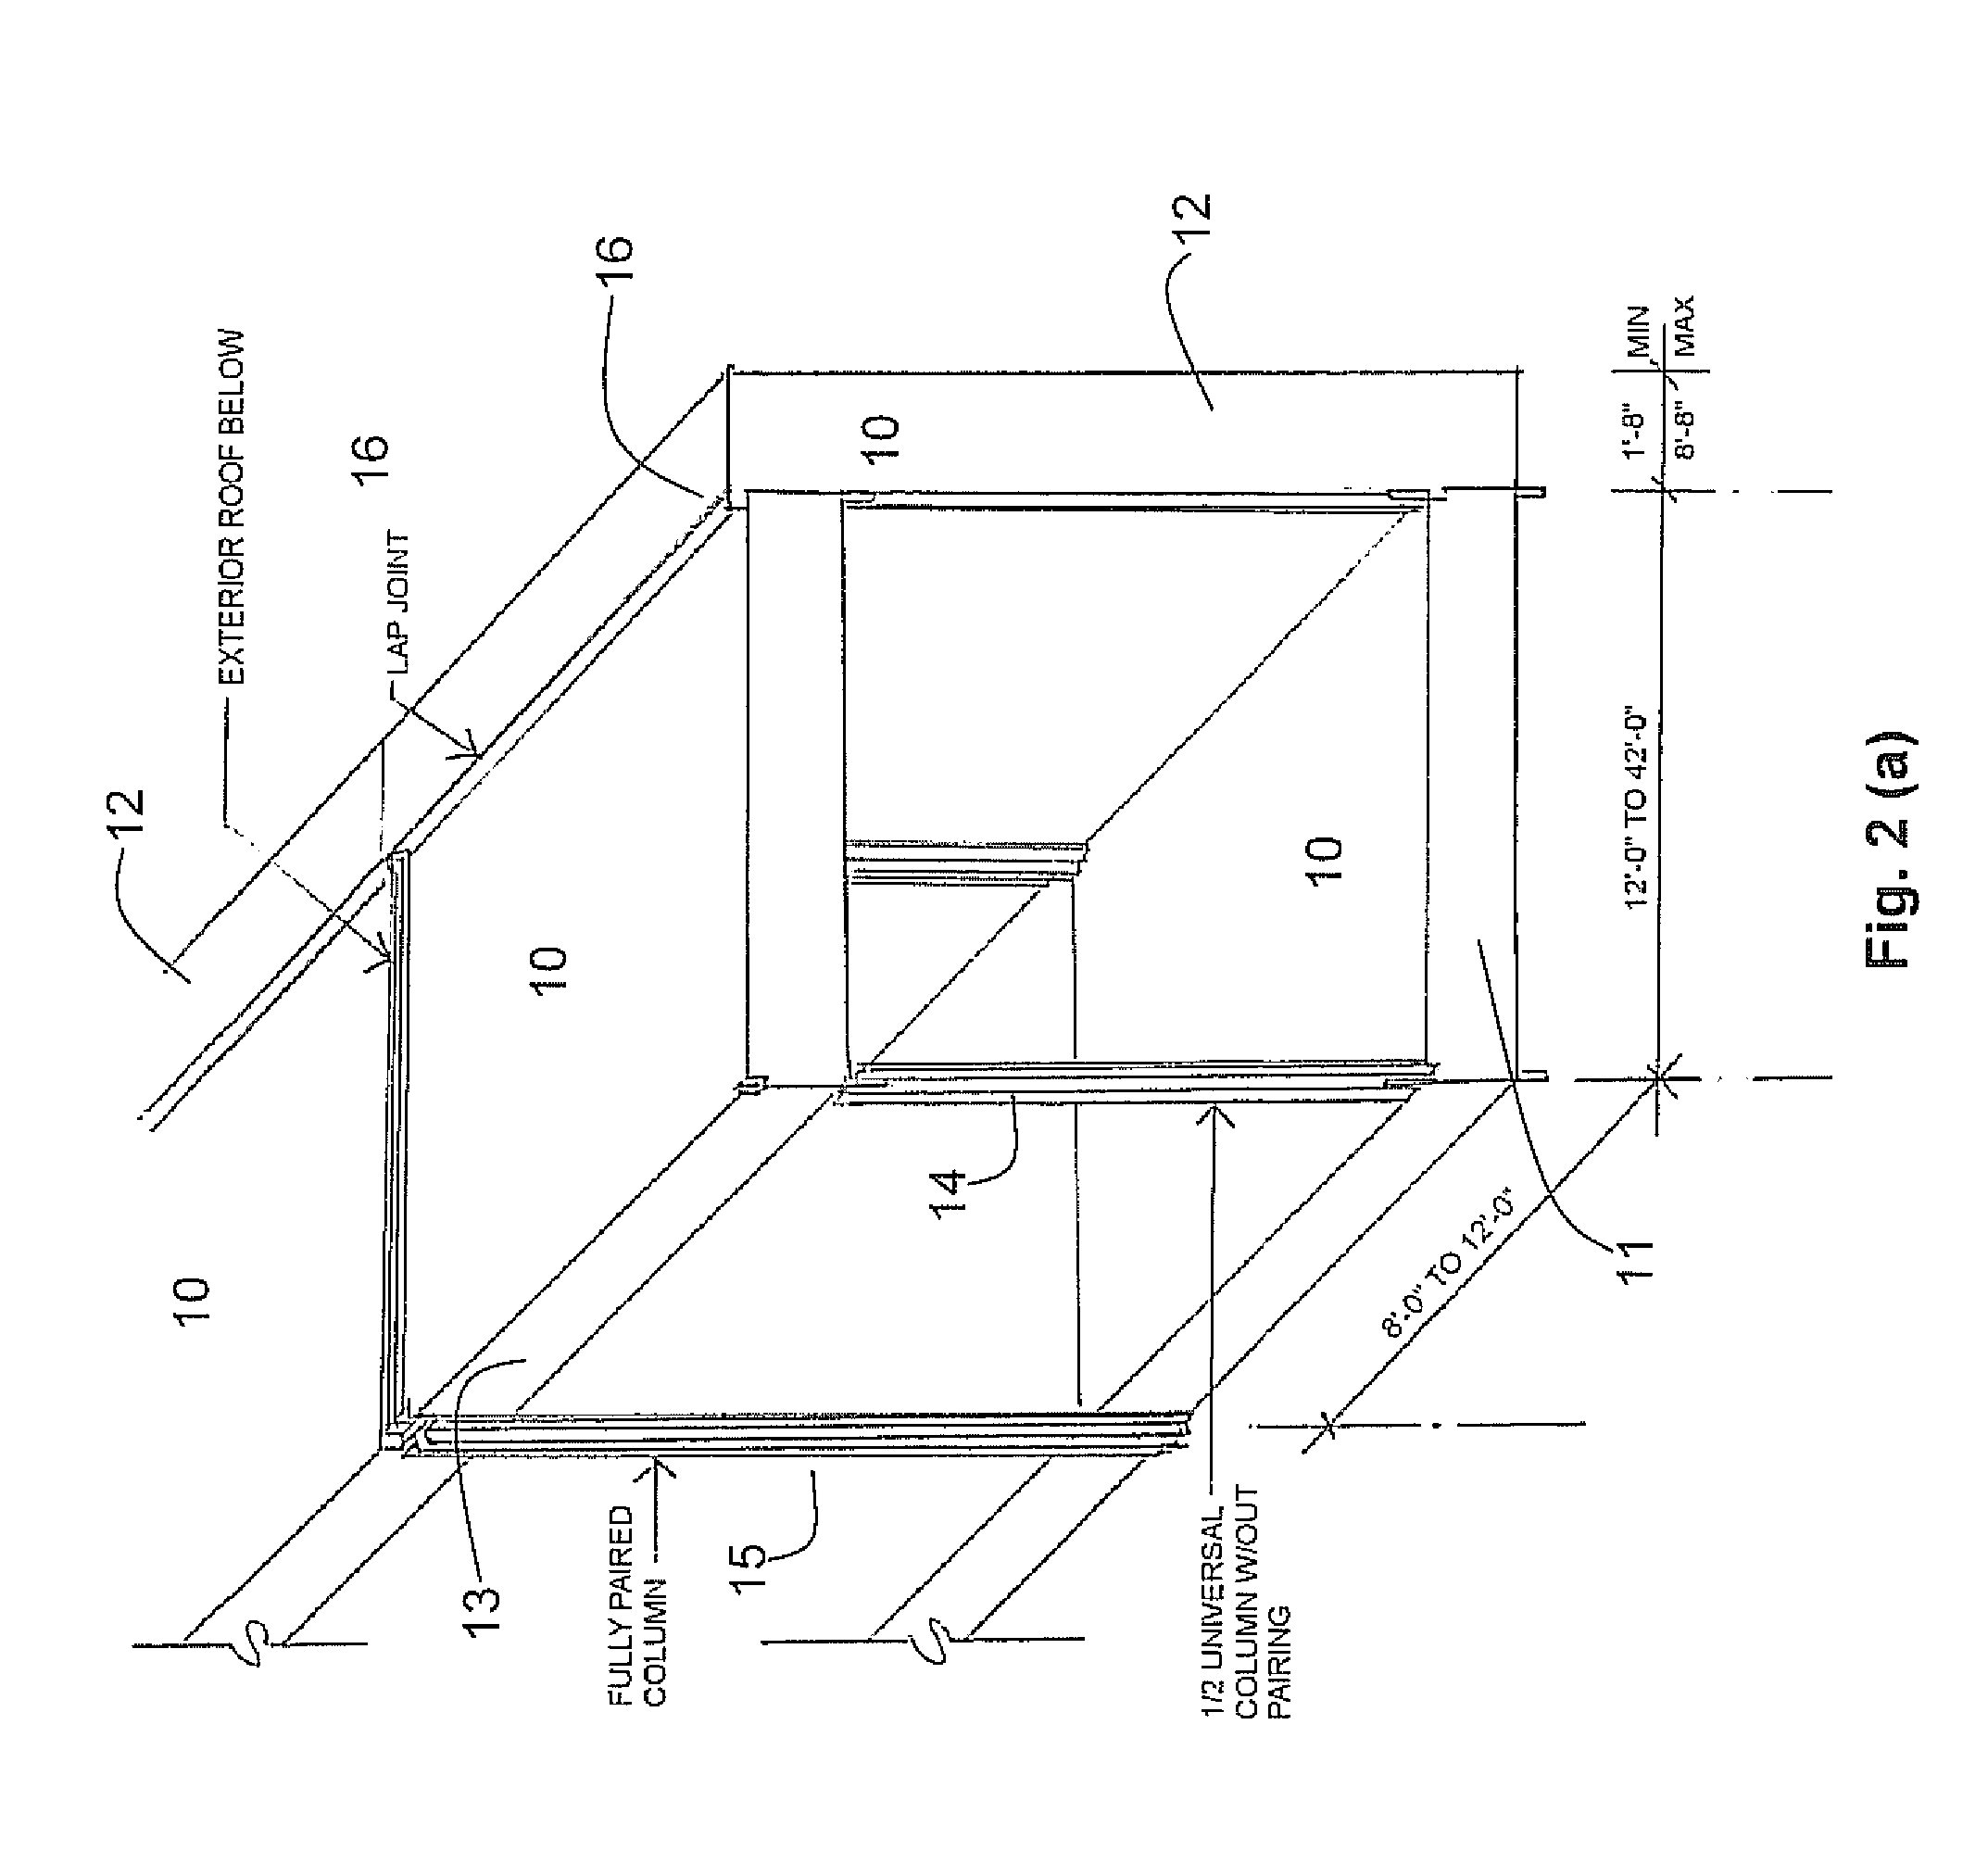 Method and apparatus for designing, producing, manufacturing and delivering personalized living environments